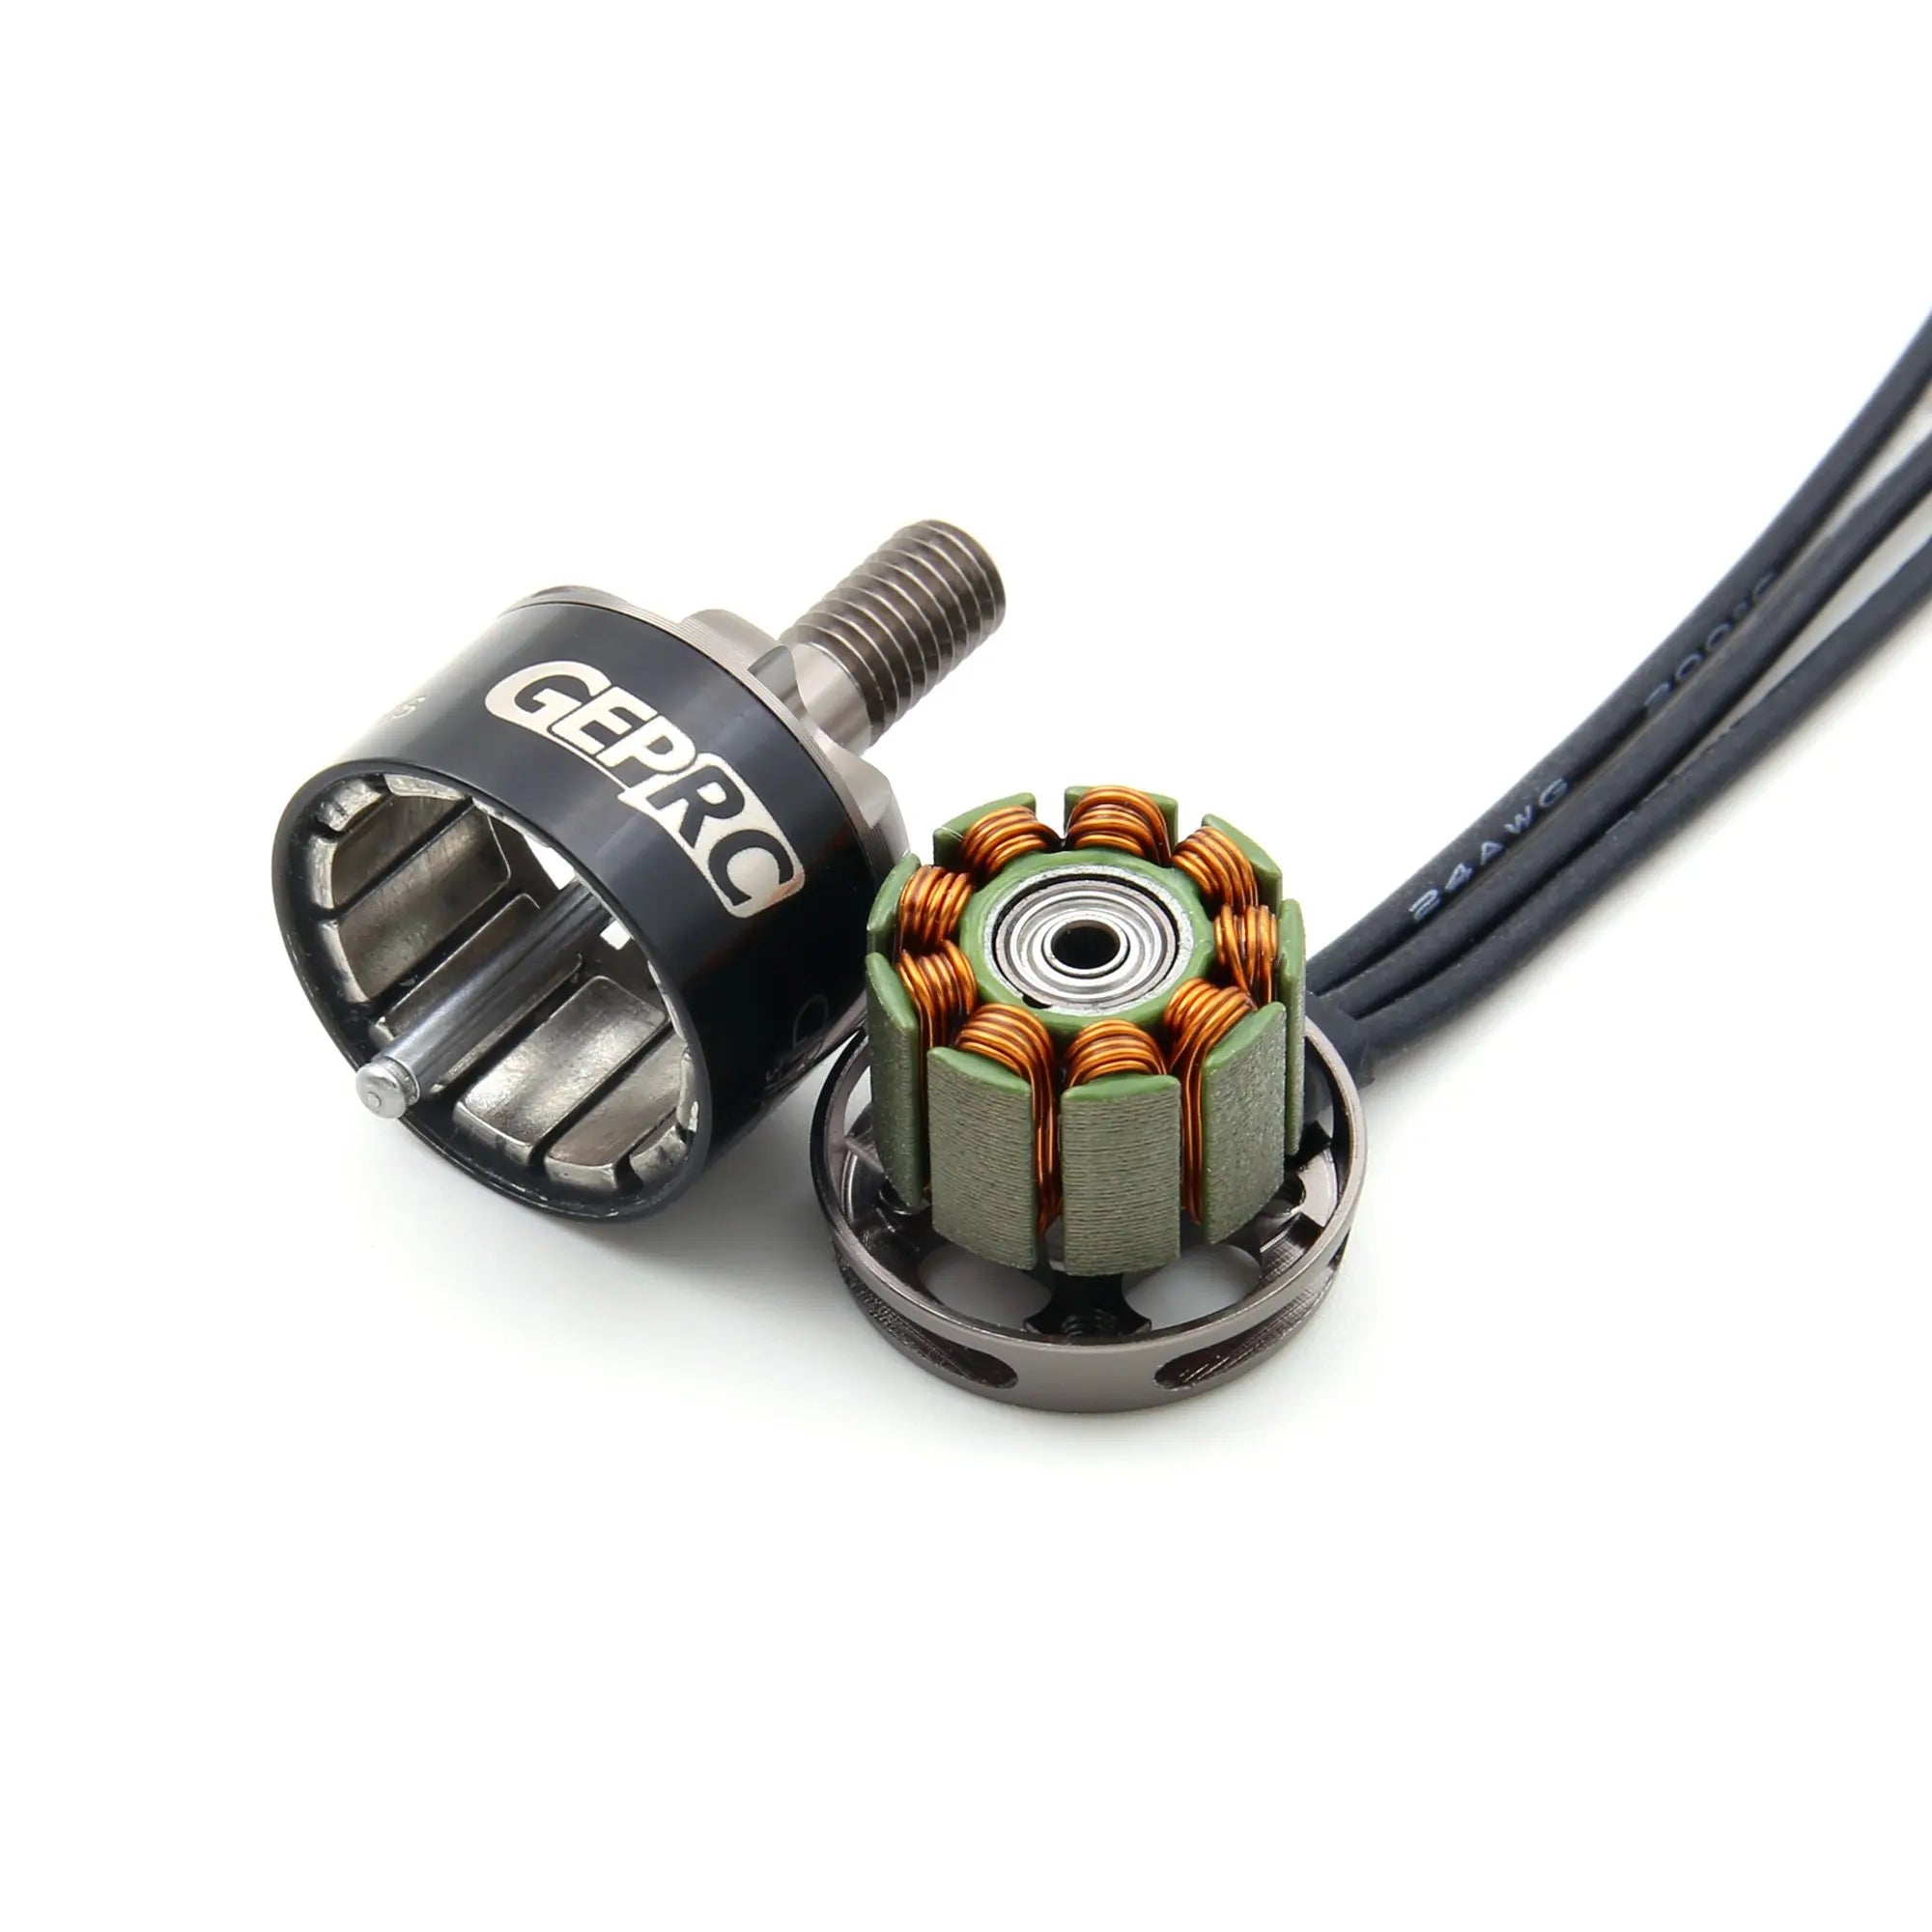 GEPRC GR1408 2500KV Motor, the motor is available in both CCC and CW threaded shaft .